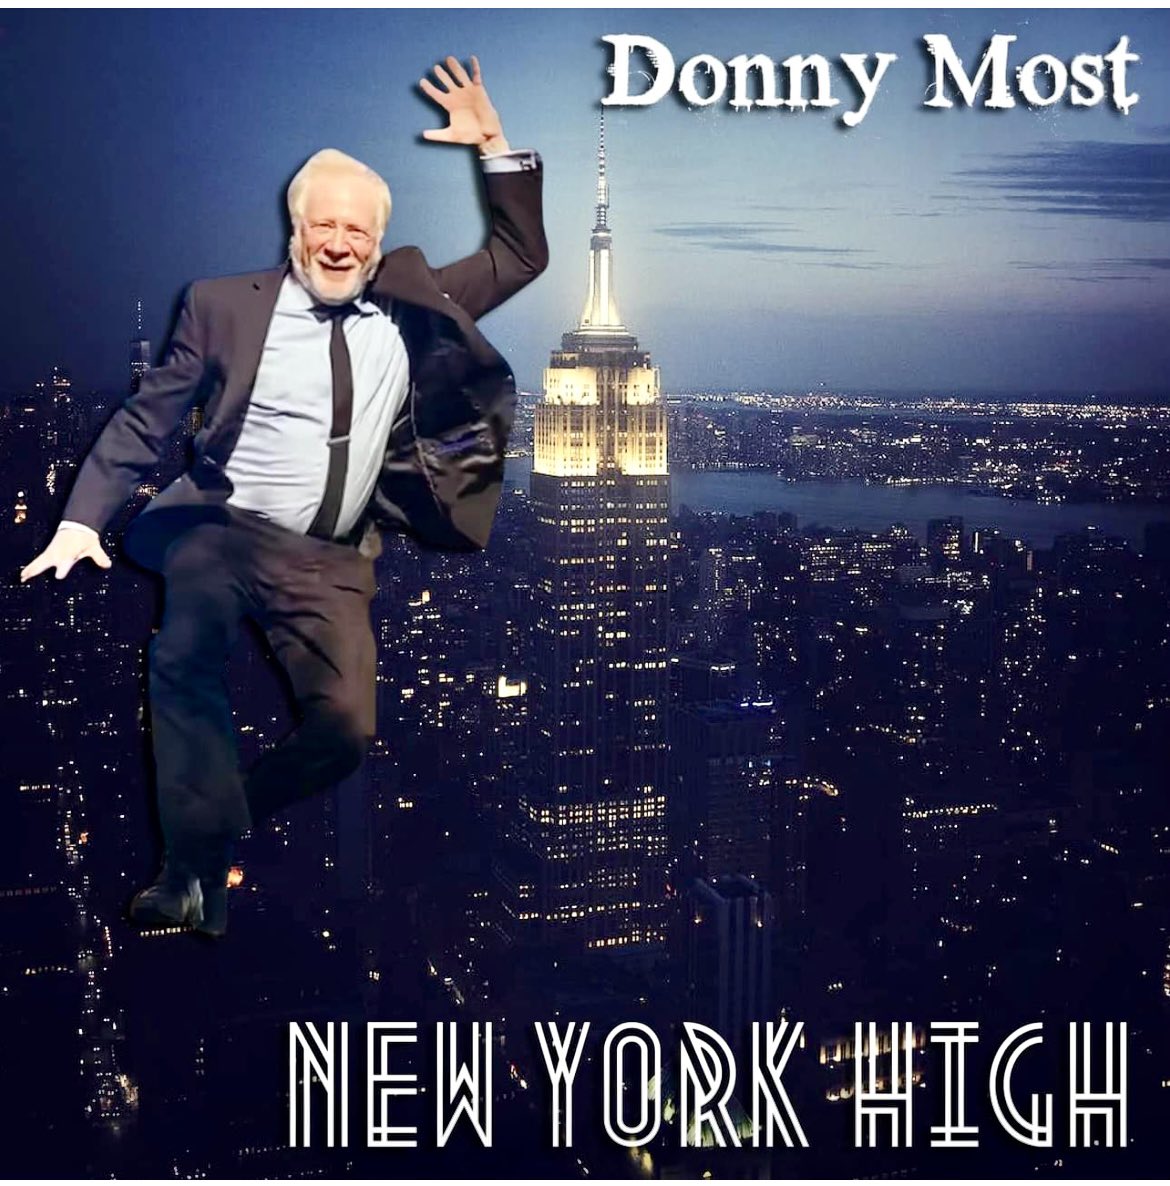 @happydaysfc fans!! Get on heritagechart.co.uk/home-mobile & vote for @most_don’s fantastic song, “New York High!” Ur vote counts getting Donny to #1 Enjoy the song 👇 vimeo.com/876926777